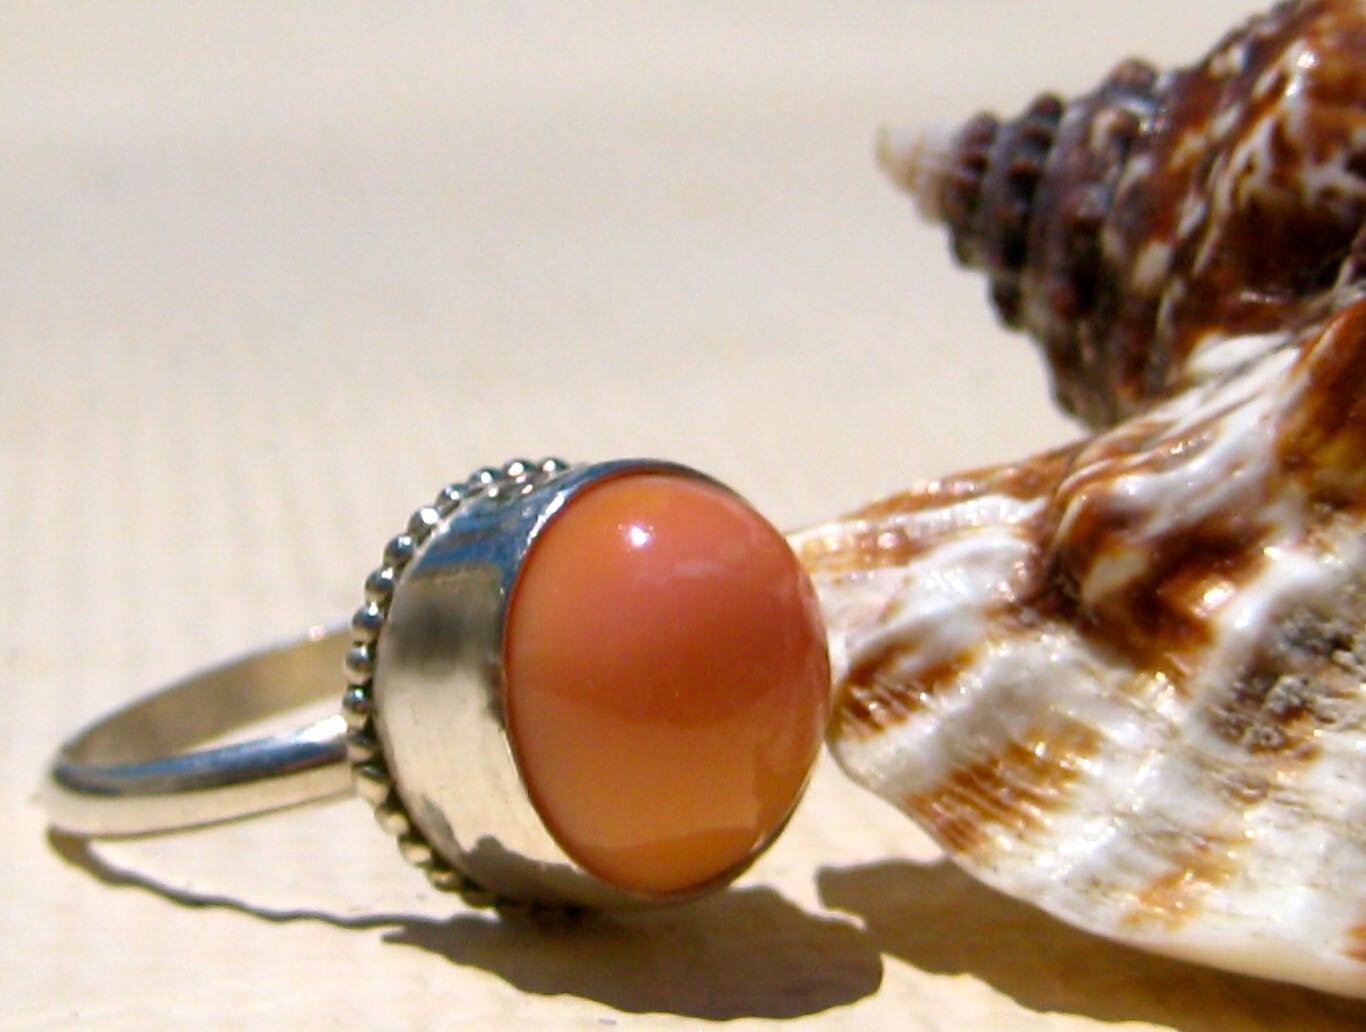 An old favorite 🐚 This is a real queen conch pearl! By far the biggest one I&rsquo;ve ever seen. I had the privilege of building a simple silver setting for it well over a decade ago back in Rum Cay, Bahamas. This is one of the few pieces that I mad